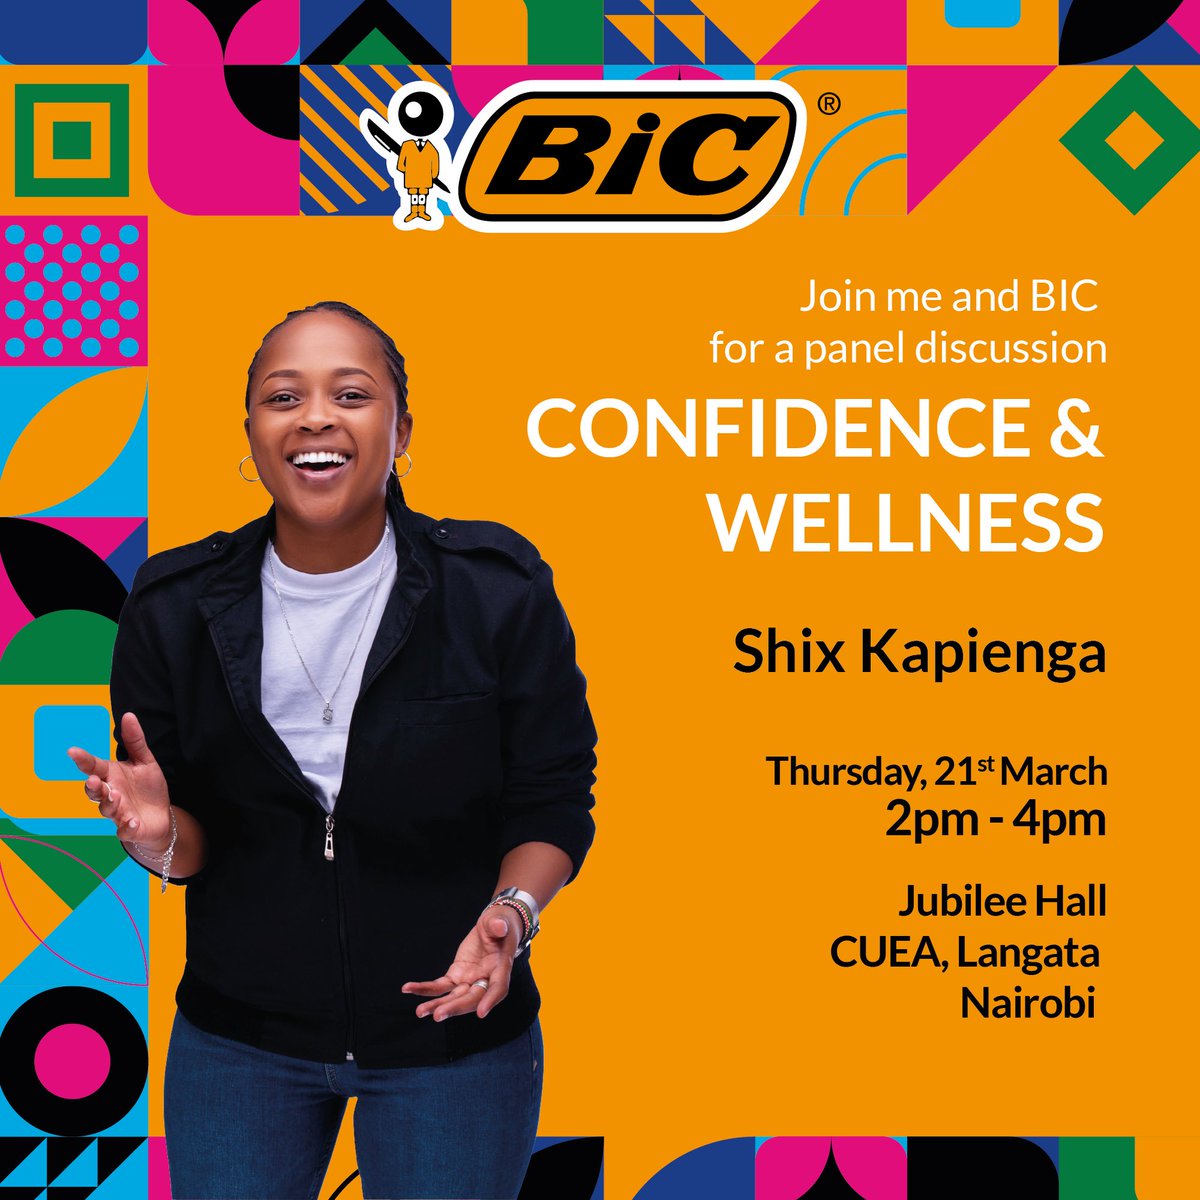 Wale wa @cuea_official mmefikiwa 😎 …..join @BlessedNjugush and i kesho 21st of March at Catholic University from 2pm - 4pm as we talk about self confidence and wellness! Tell a friend to tell a friend 🤗🤗